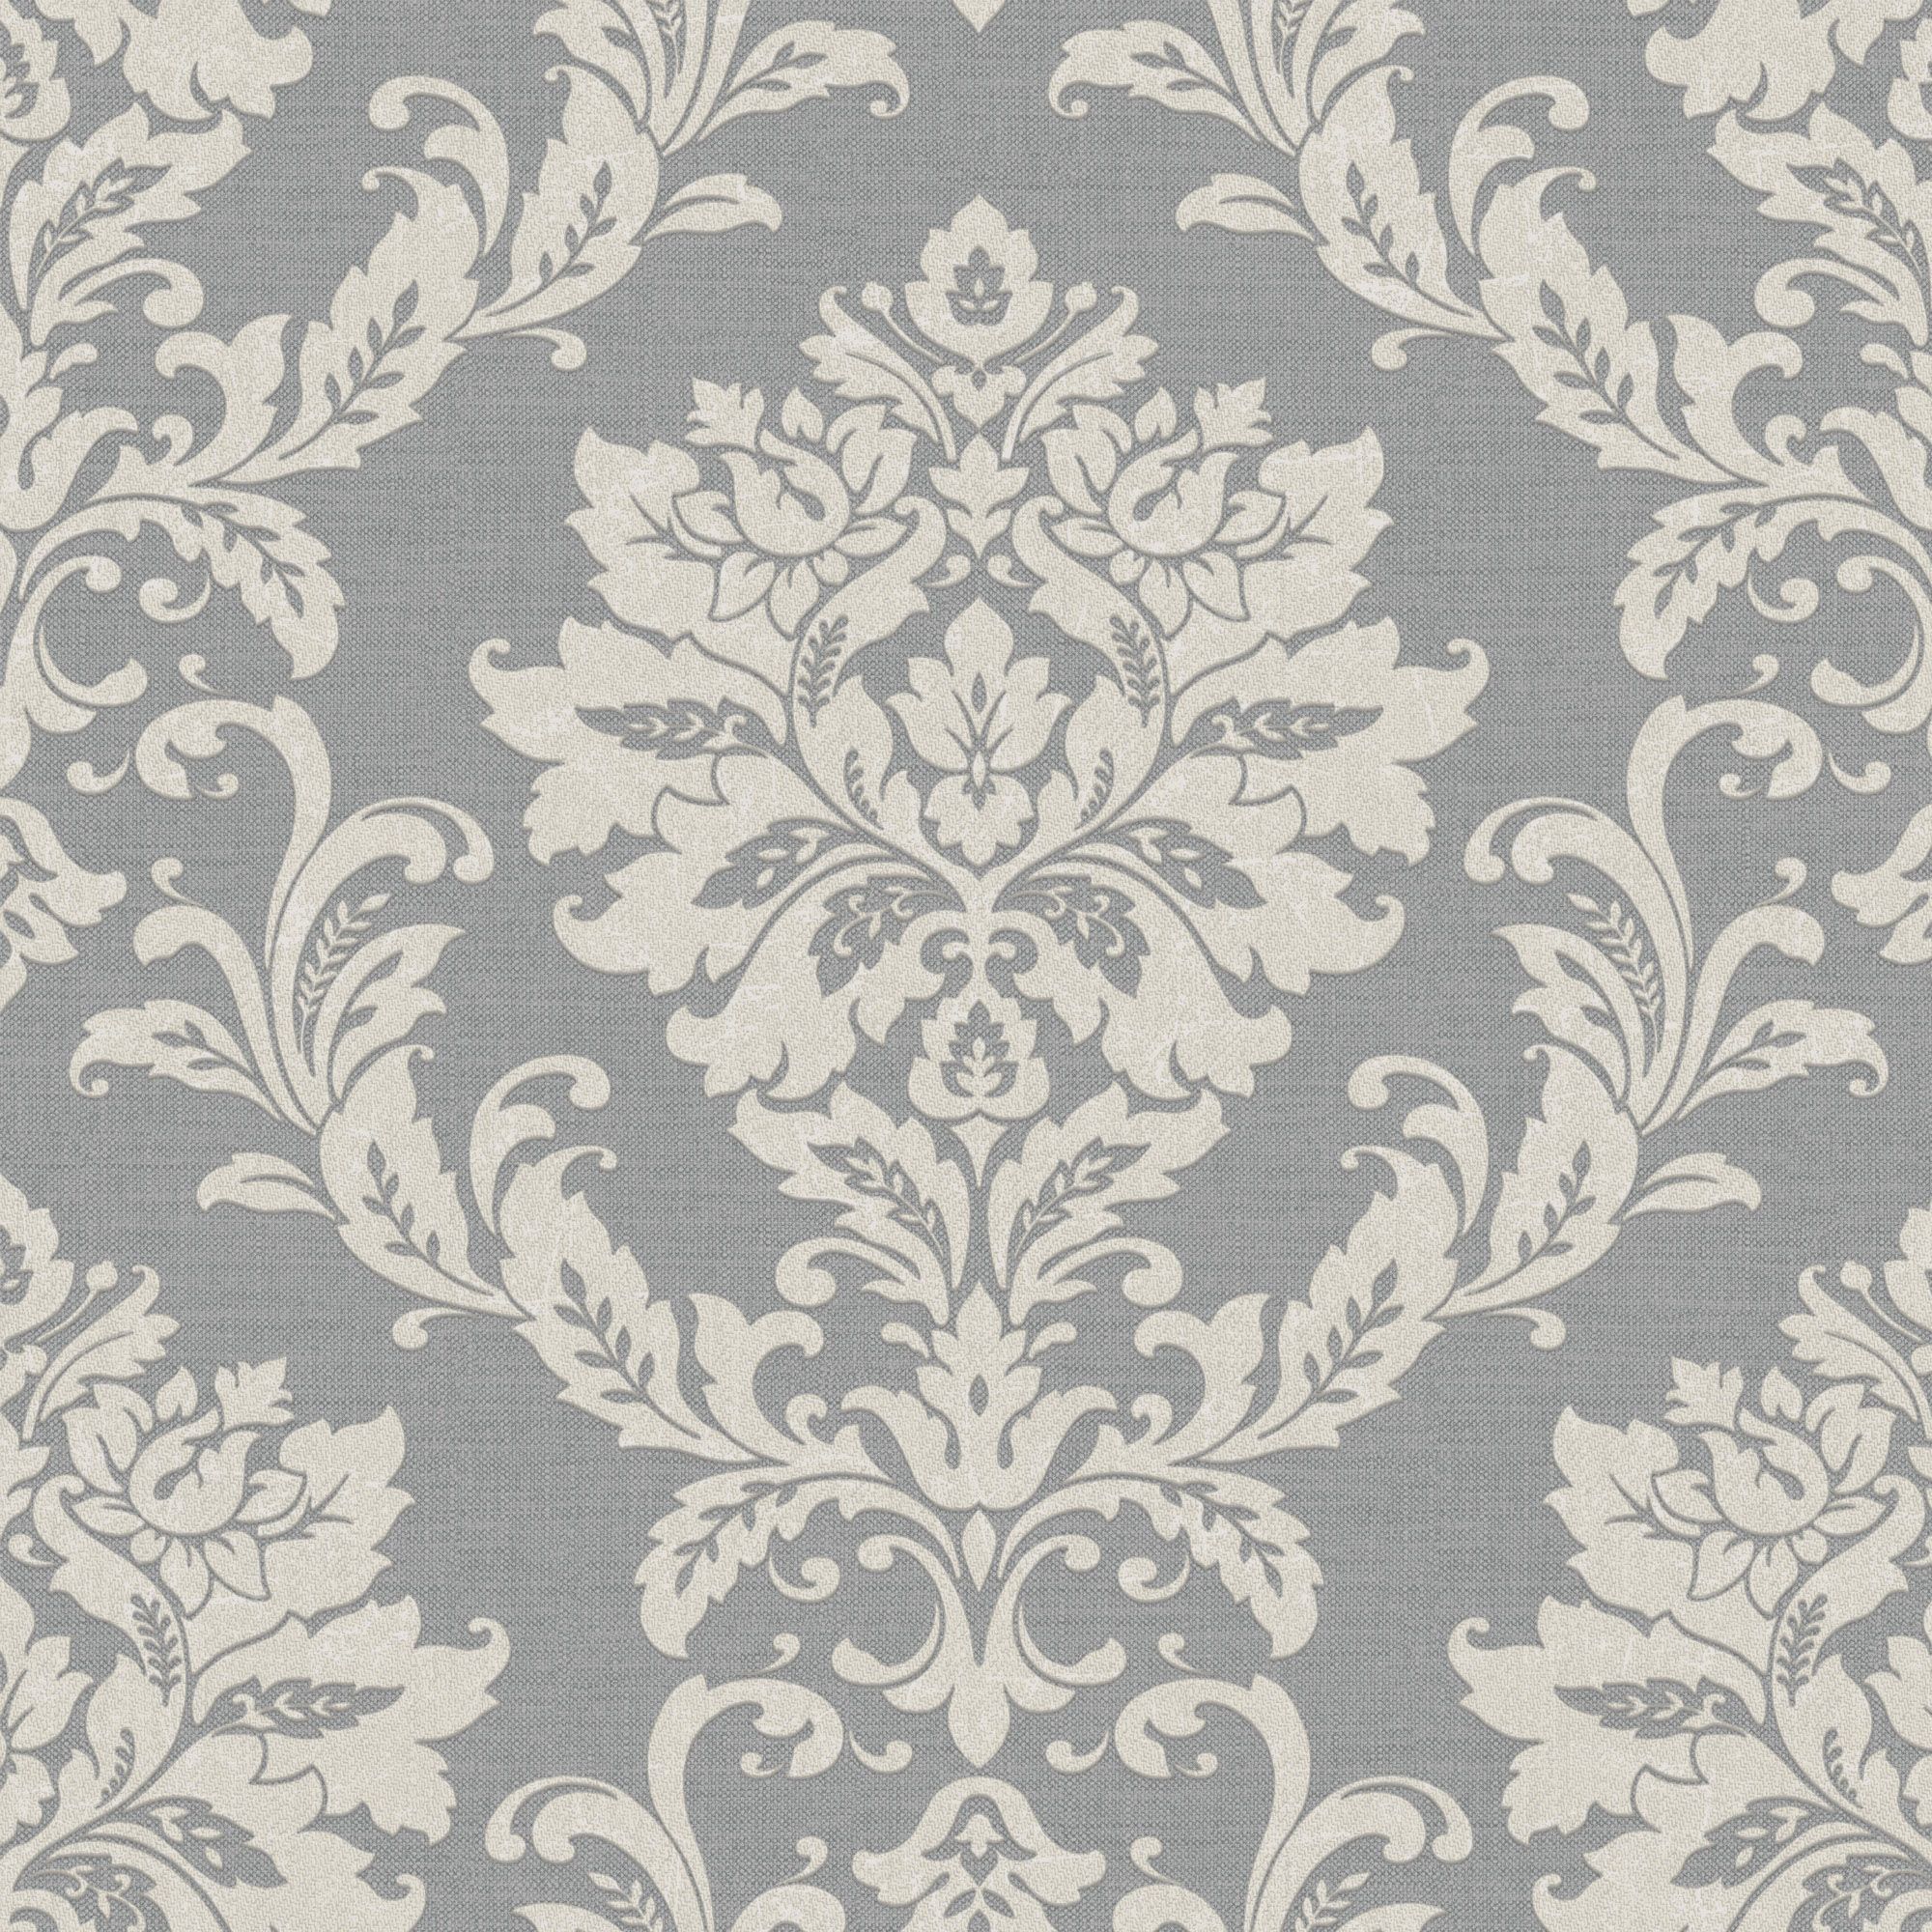 GoodHome Mire Grey Damask Woven effect Textured Wallpaper Sample